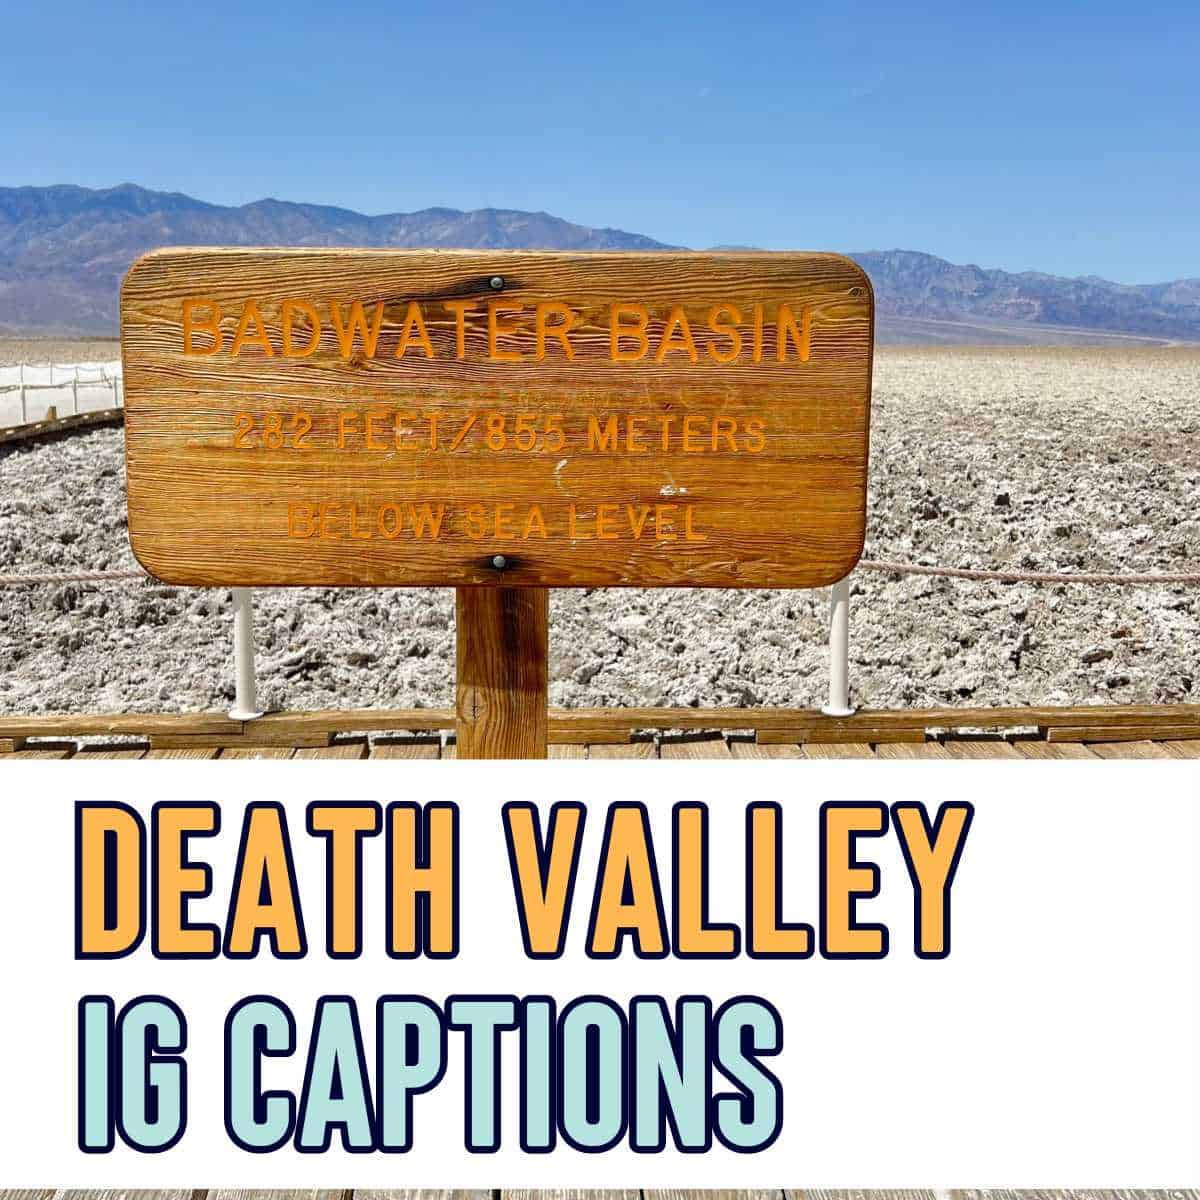 Death Valley Instagram captions perfect for capturing the majestic beauty of this natural wonderland.